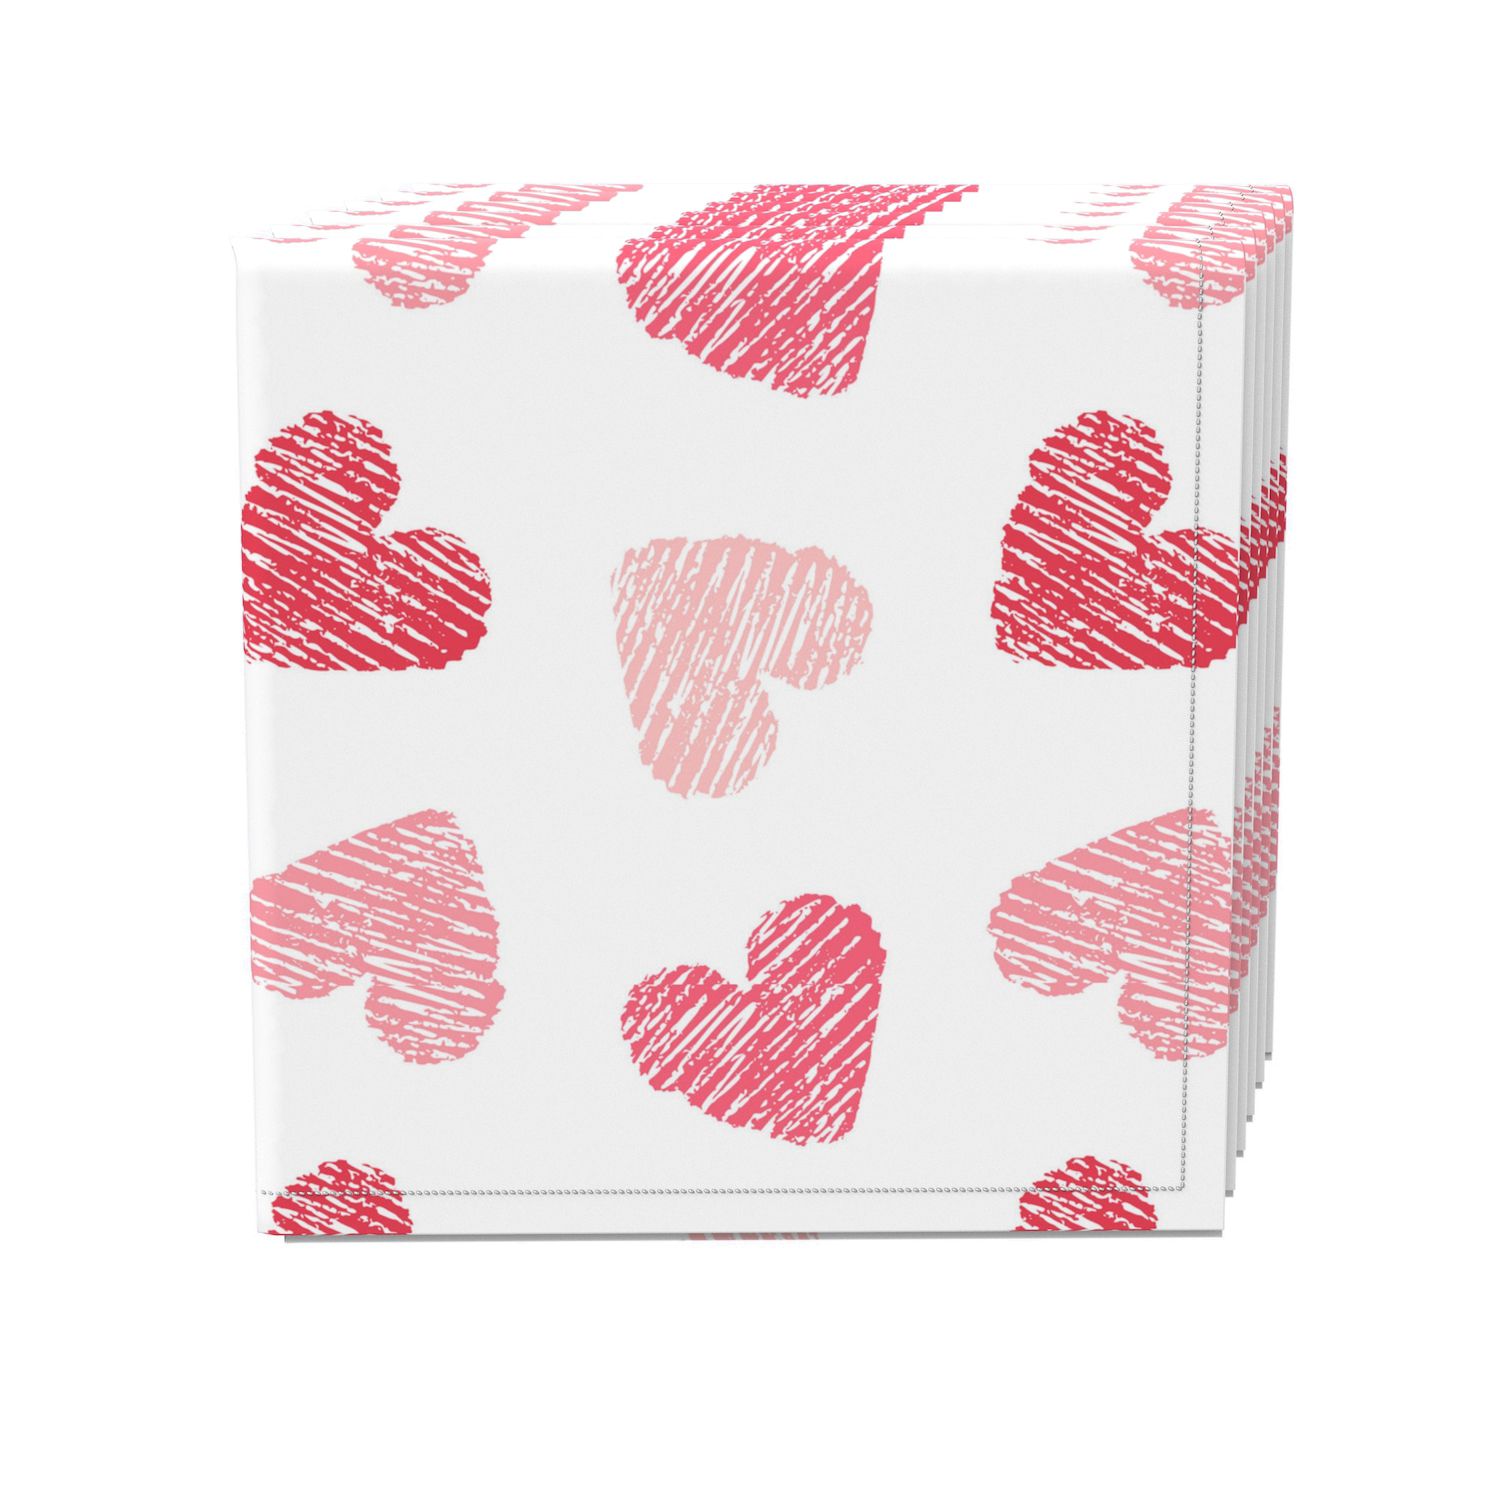 Hallmark Pack of 24 Assorted Valentine's Day Cards - Heart Deco